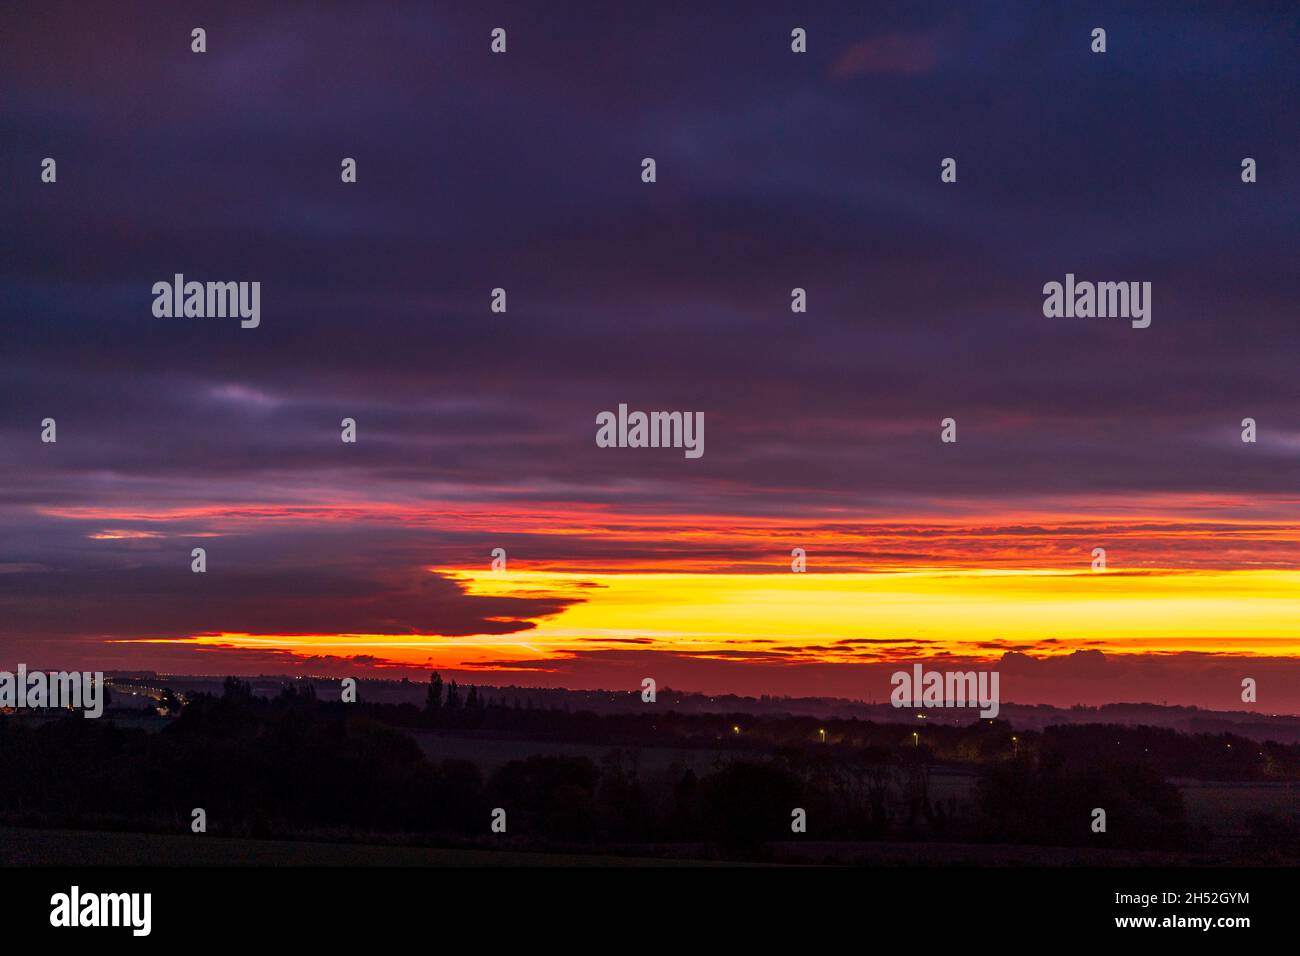 Dark unbroken layer of clouds overhead with a patch of bright yellow and orange cloud on the horizon where dawn's first light breaks through over a silhouetted Kent countryside. Stock Photo